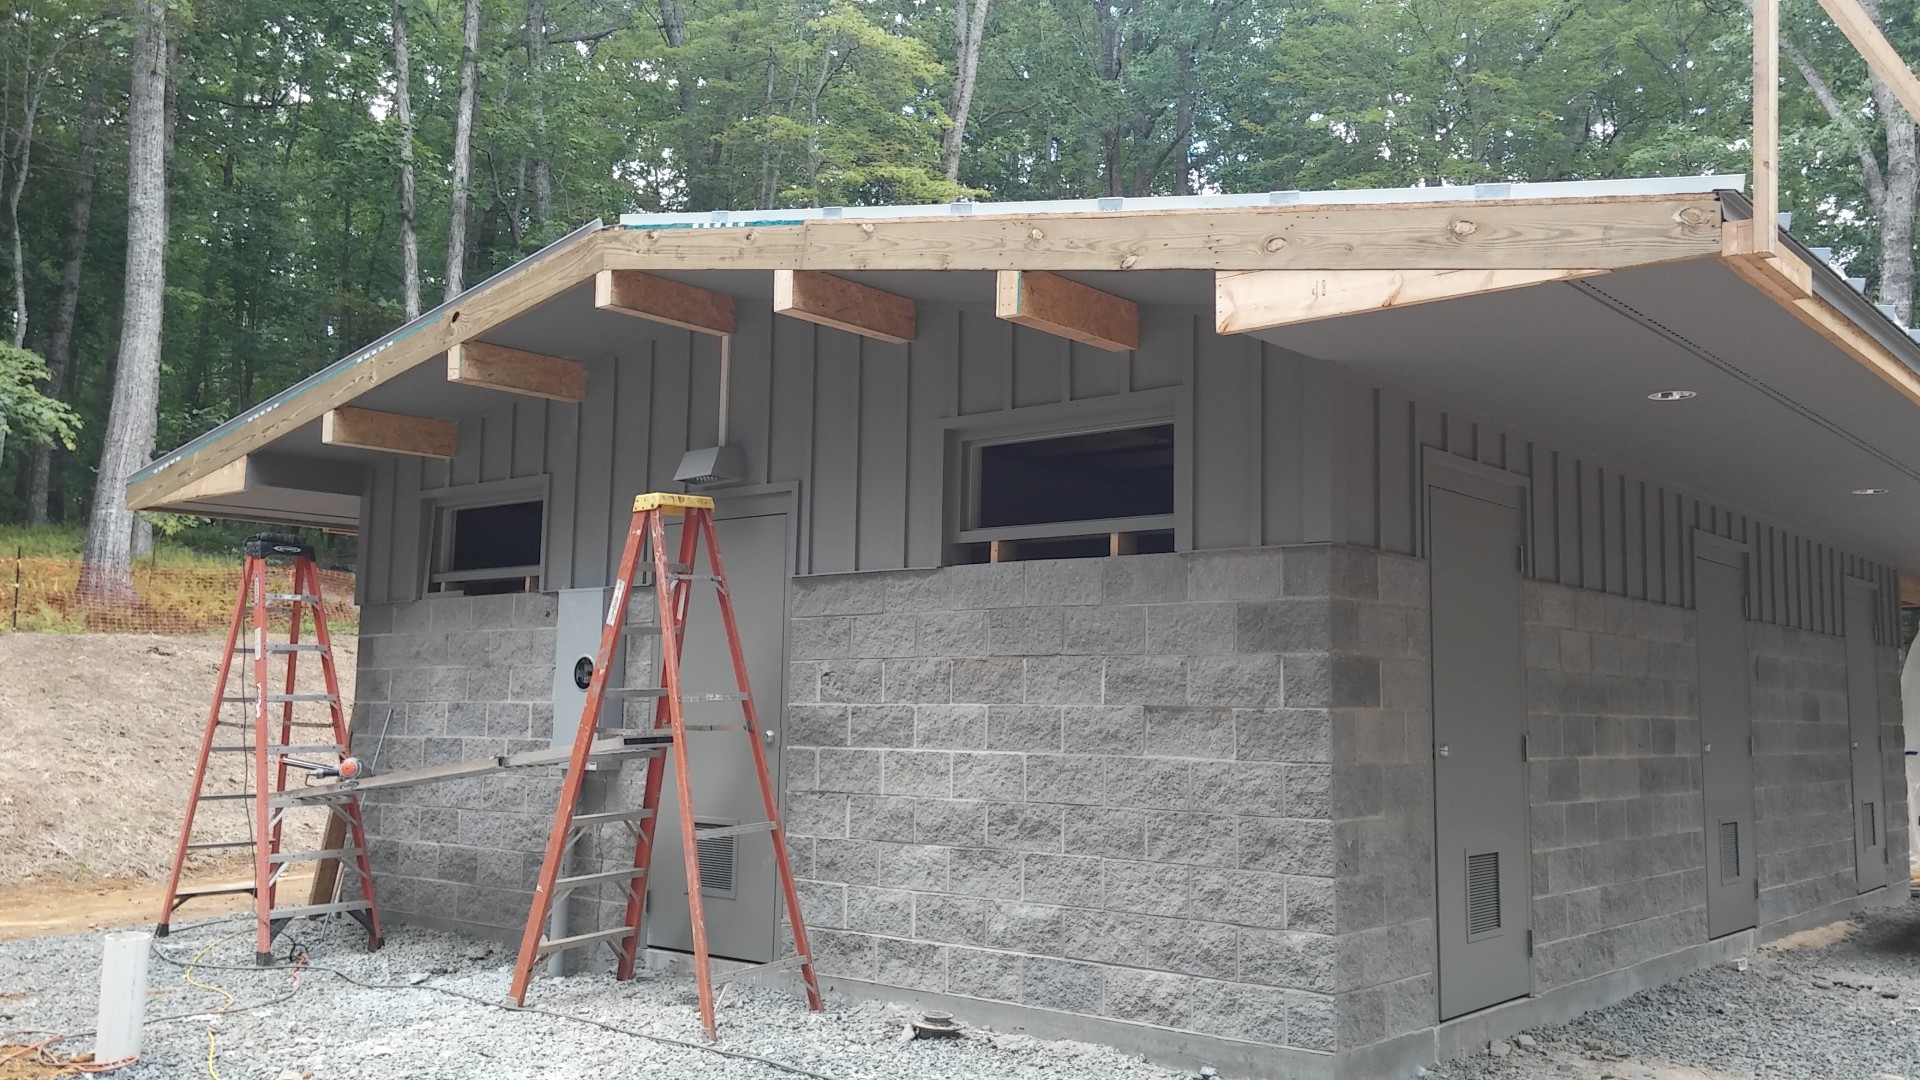 New shower facility at Price Park Campground on the Blue Ridge Parkway